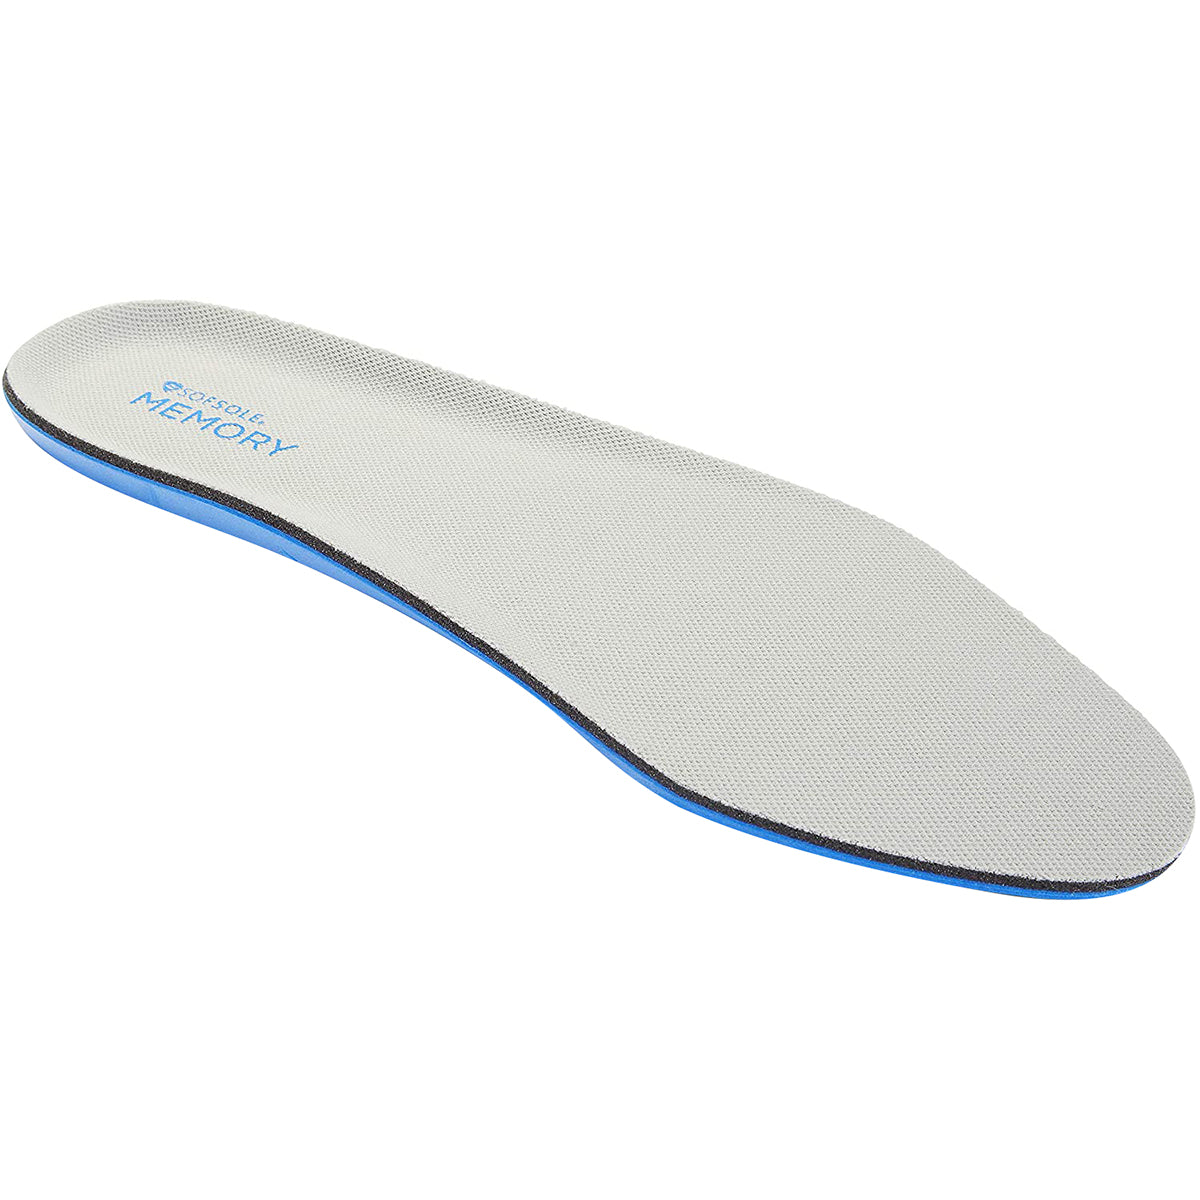 Sof Sole Memory Full Length Shoe Insoles SofSole